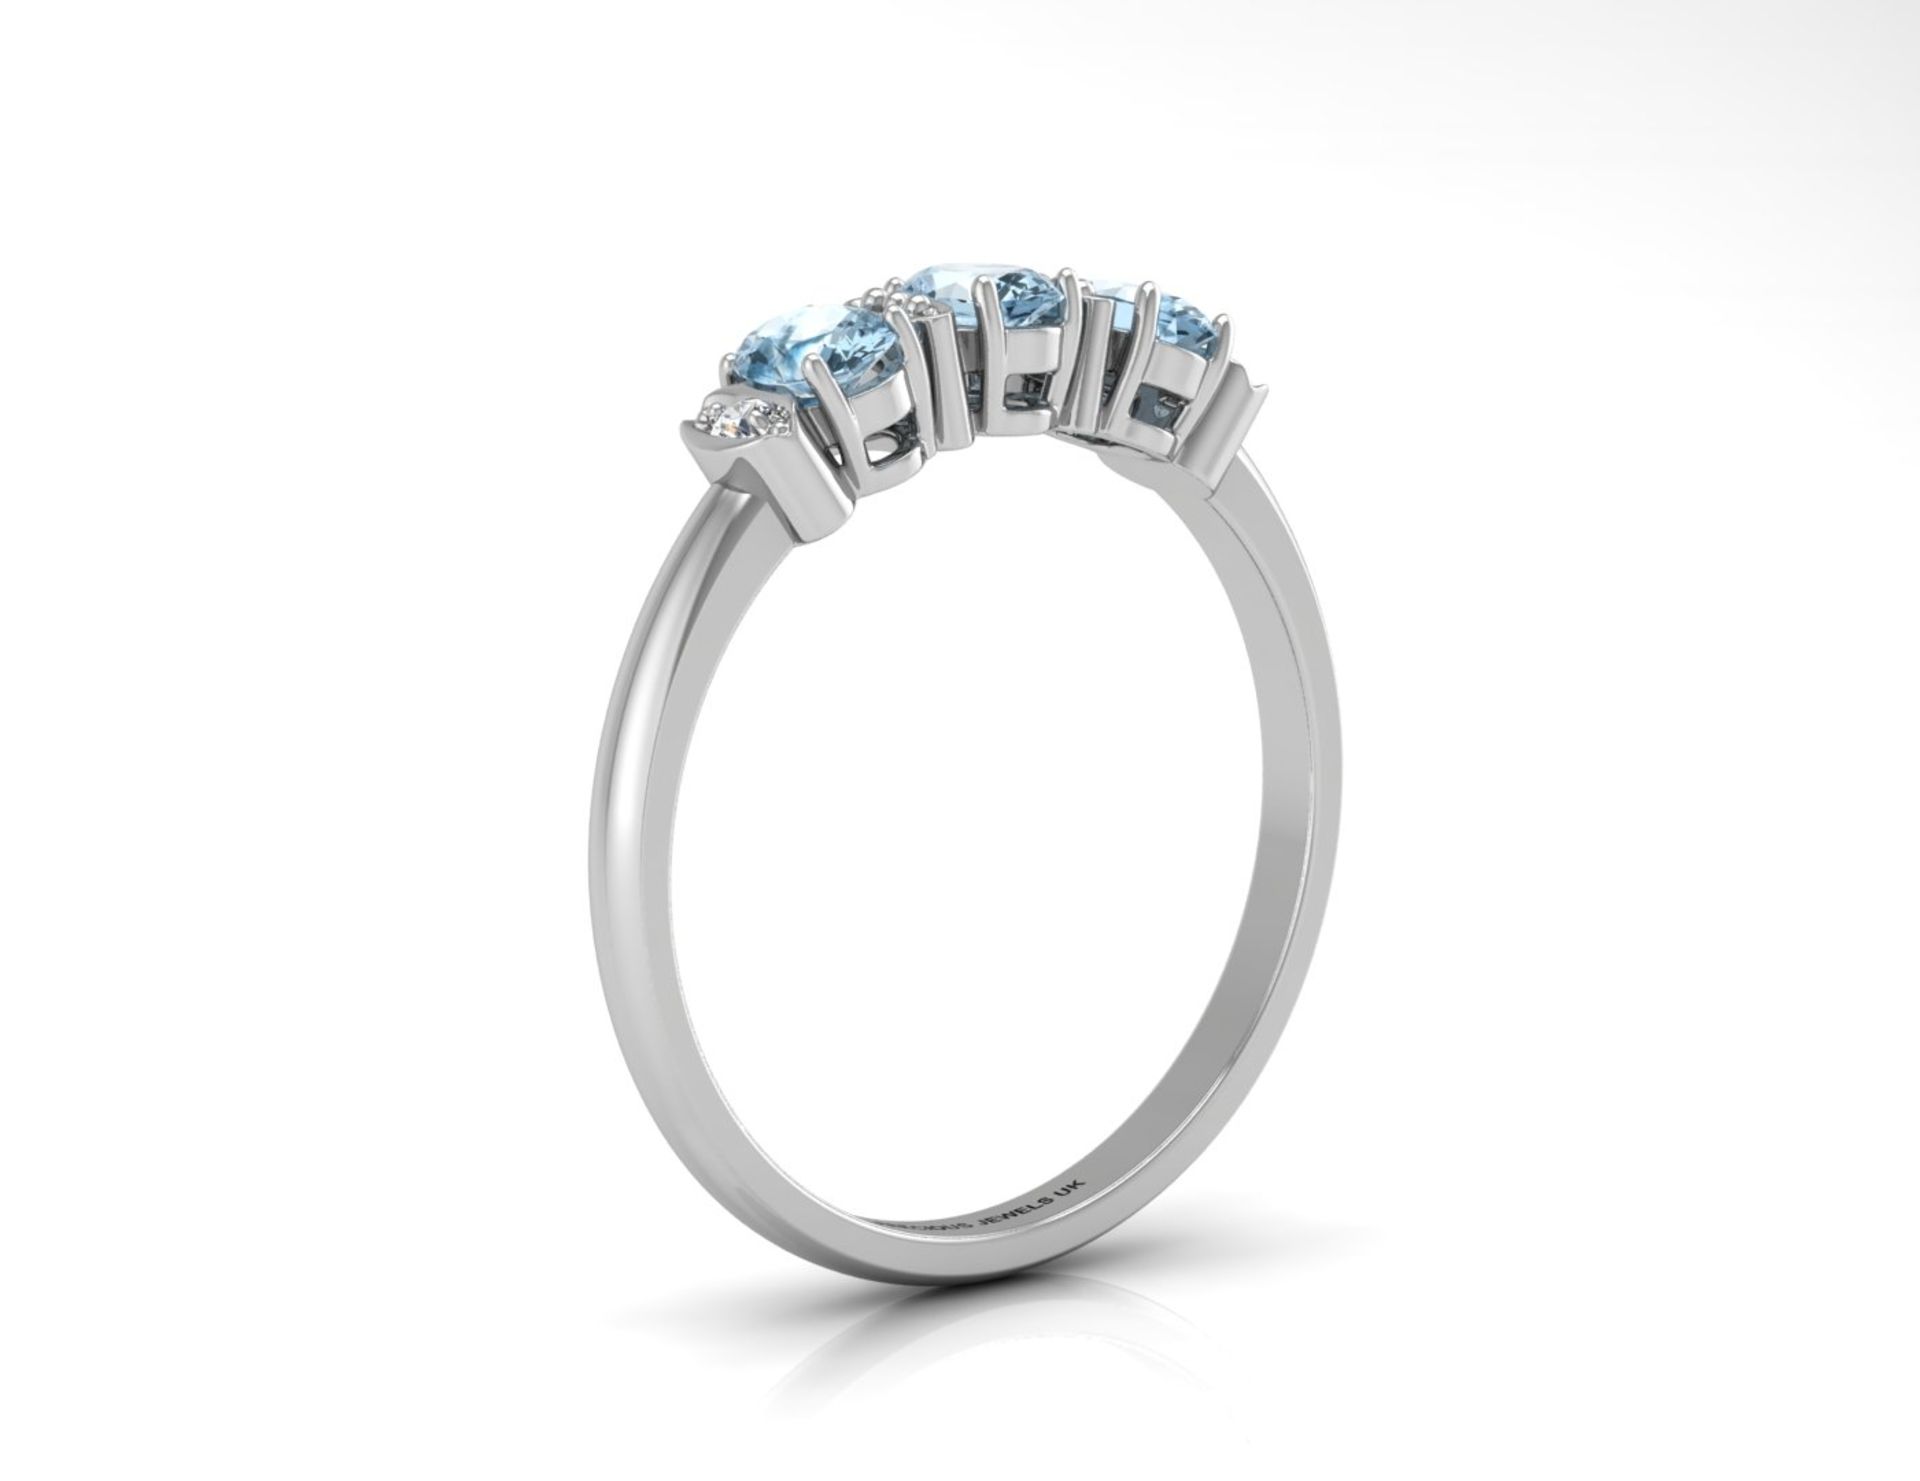 ***£959.00*** UNUSED - Certified by GIE 9ct White Gold Semi Eternity Diamond And Blue Topaz Ring 0. - Image 2 of 5